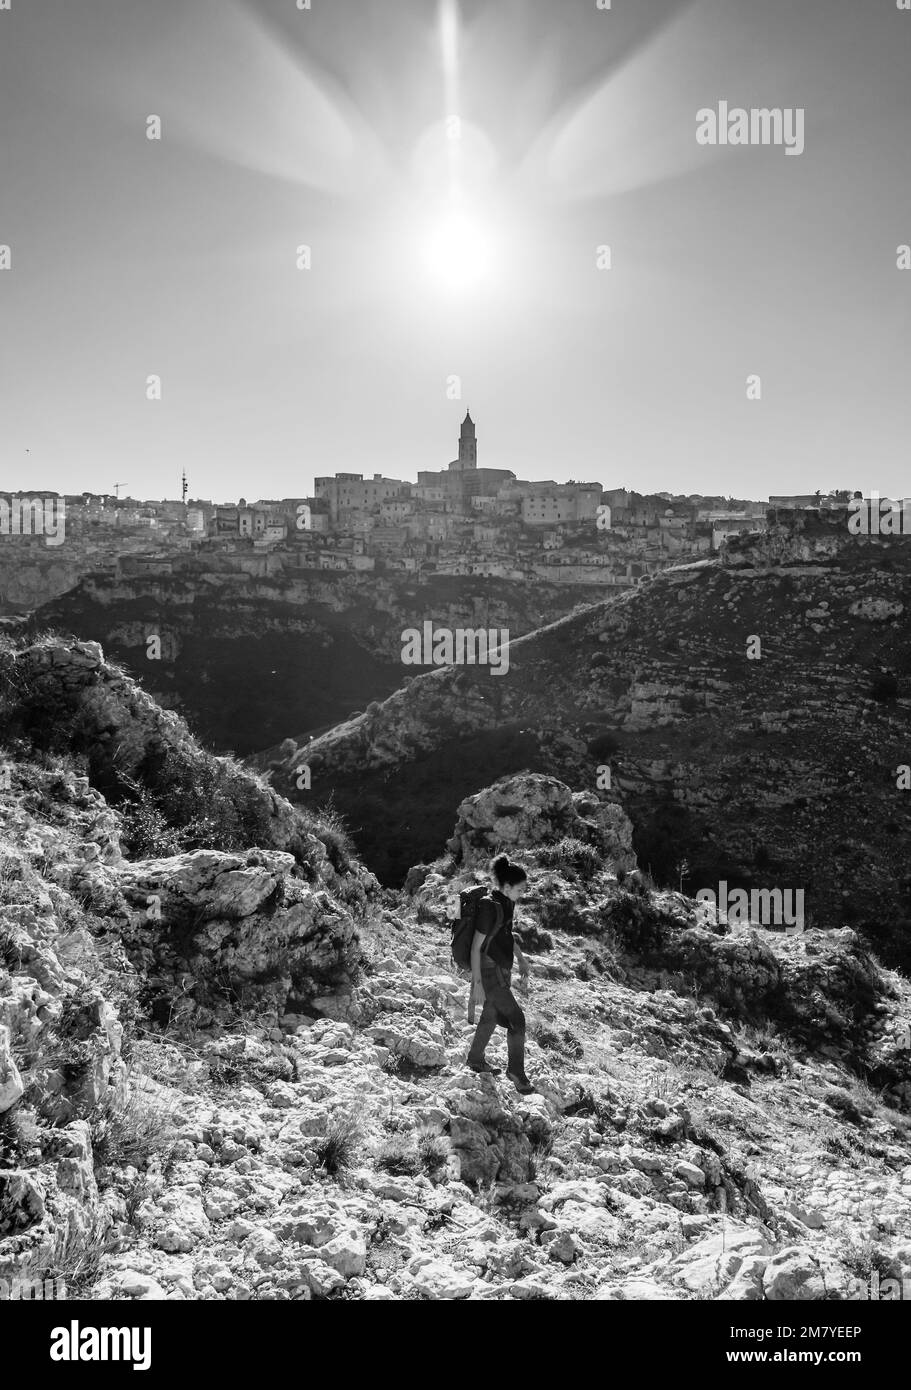 Matera (Basilicata) - The historic center of stone city in southern Italy, a tourist attraction for famous 'Sassi' old town, Murgia and Gravina canyon Stock Photo